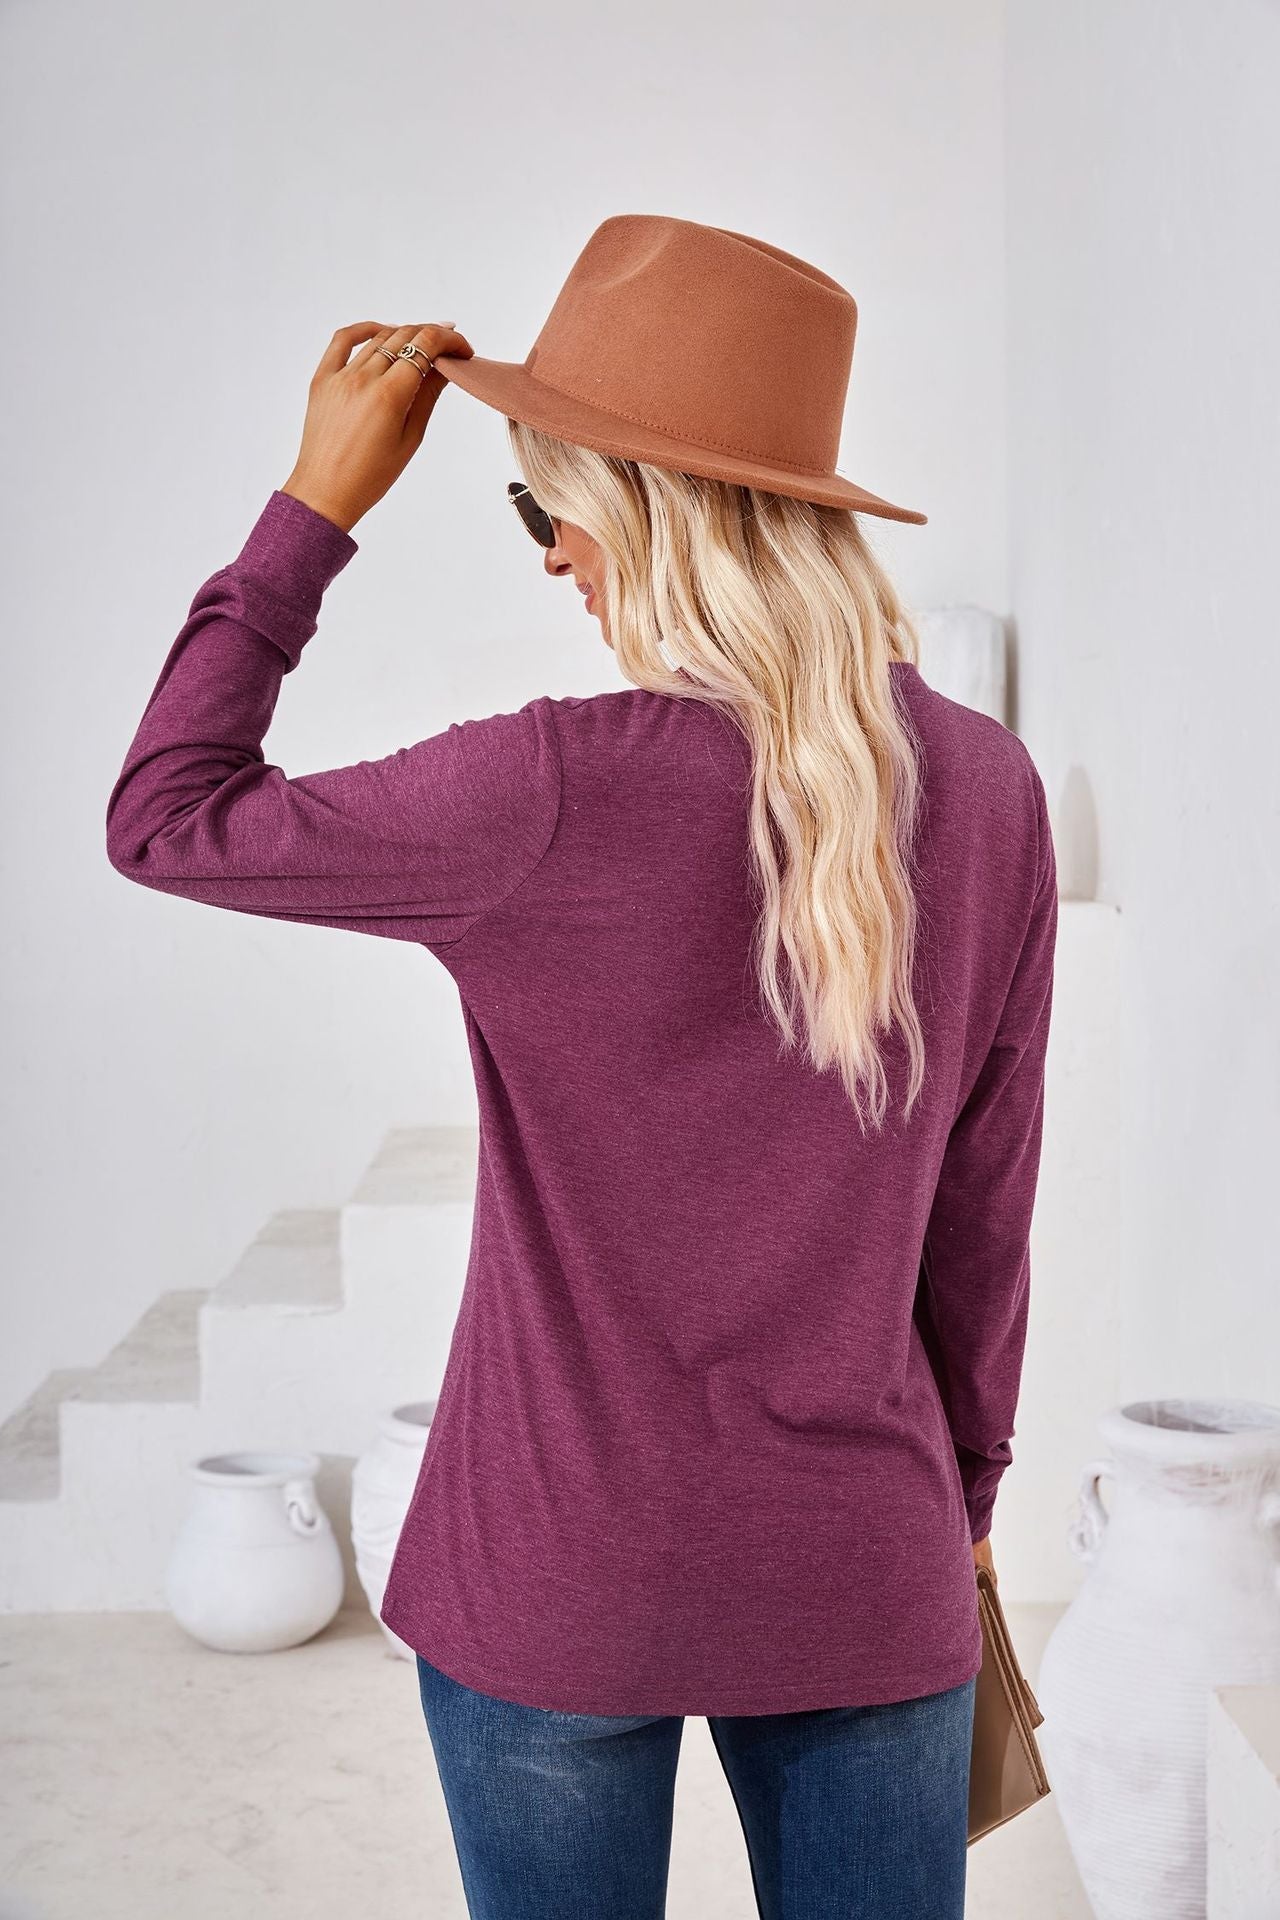 Autumn Winter Solid Color V-neck Button Loose Long-Sleeved T-shirt Top Ladies